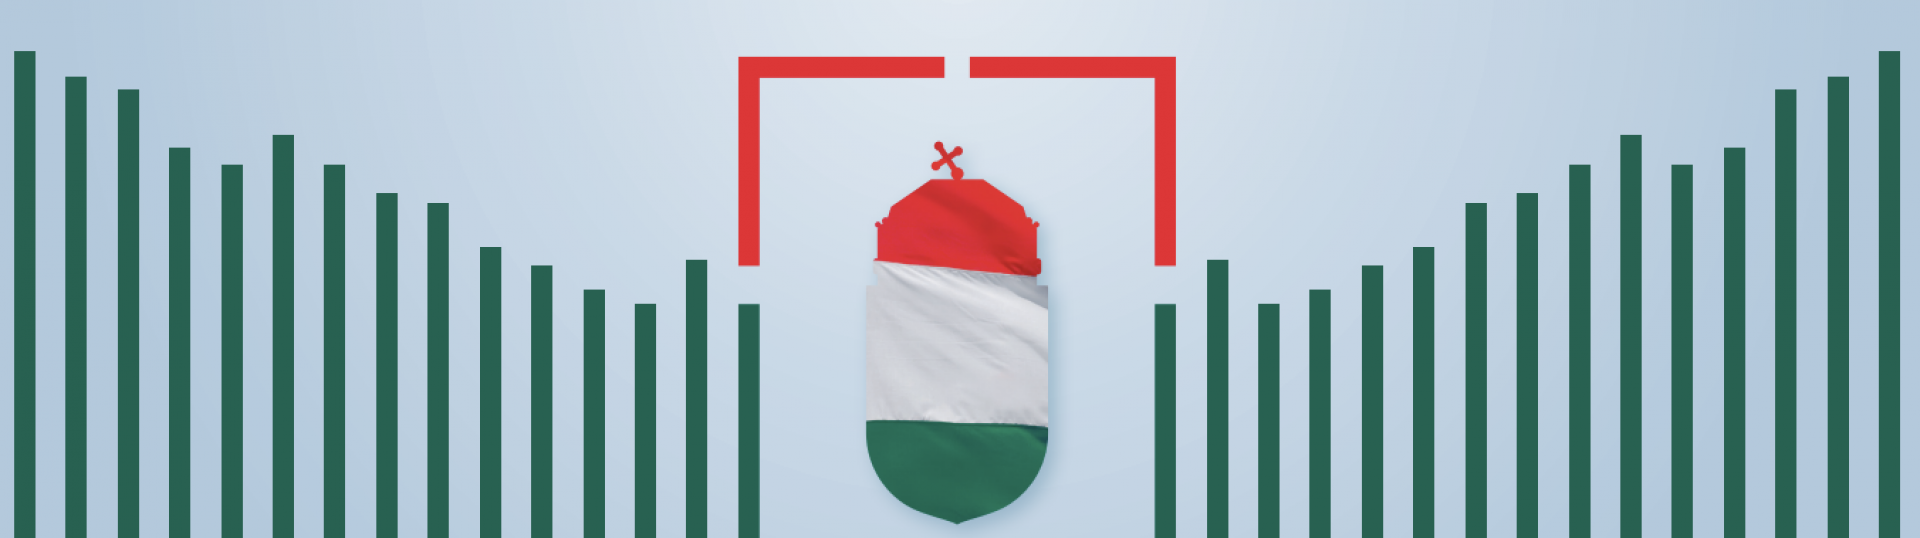 Rate your state - Public services in Hungary 